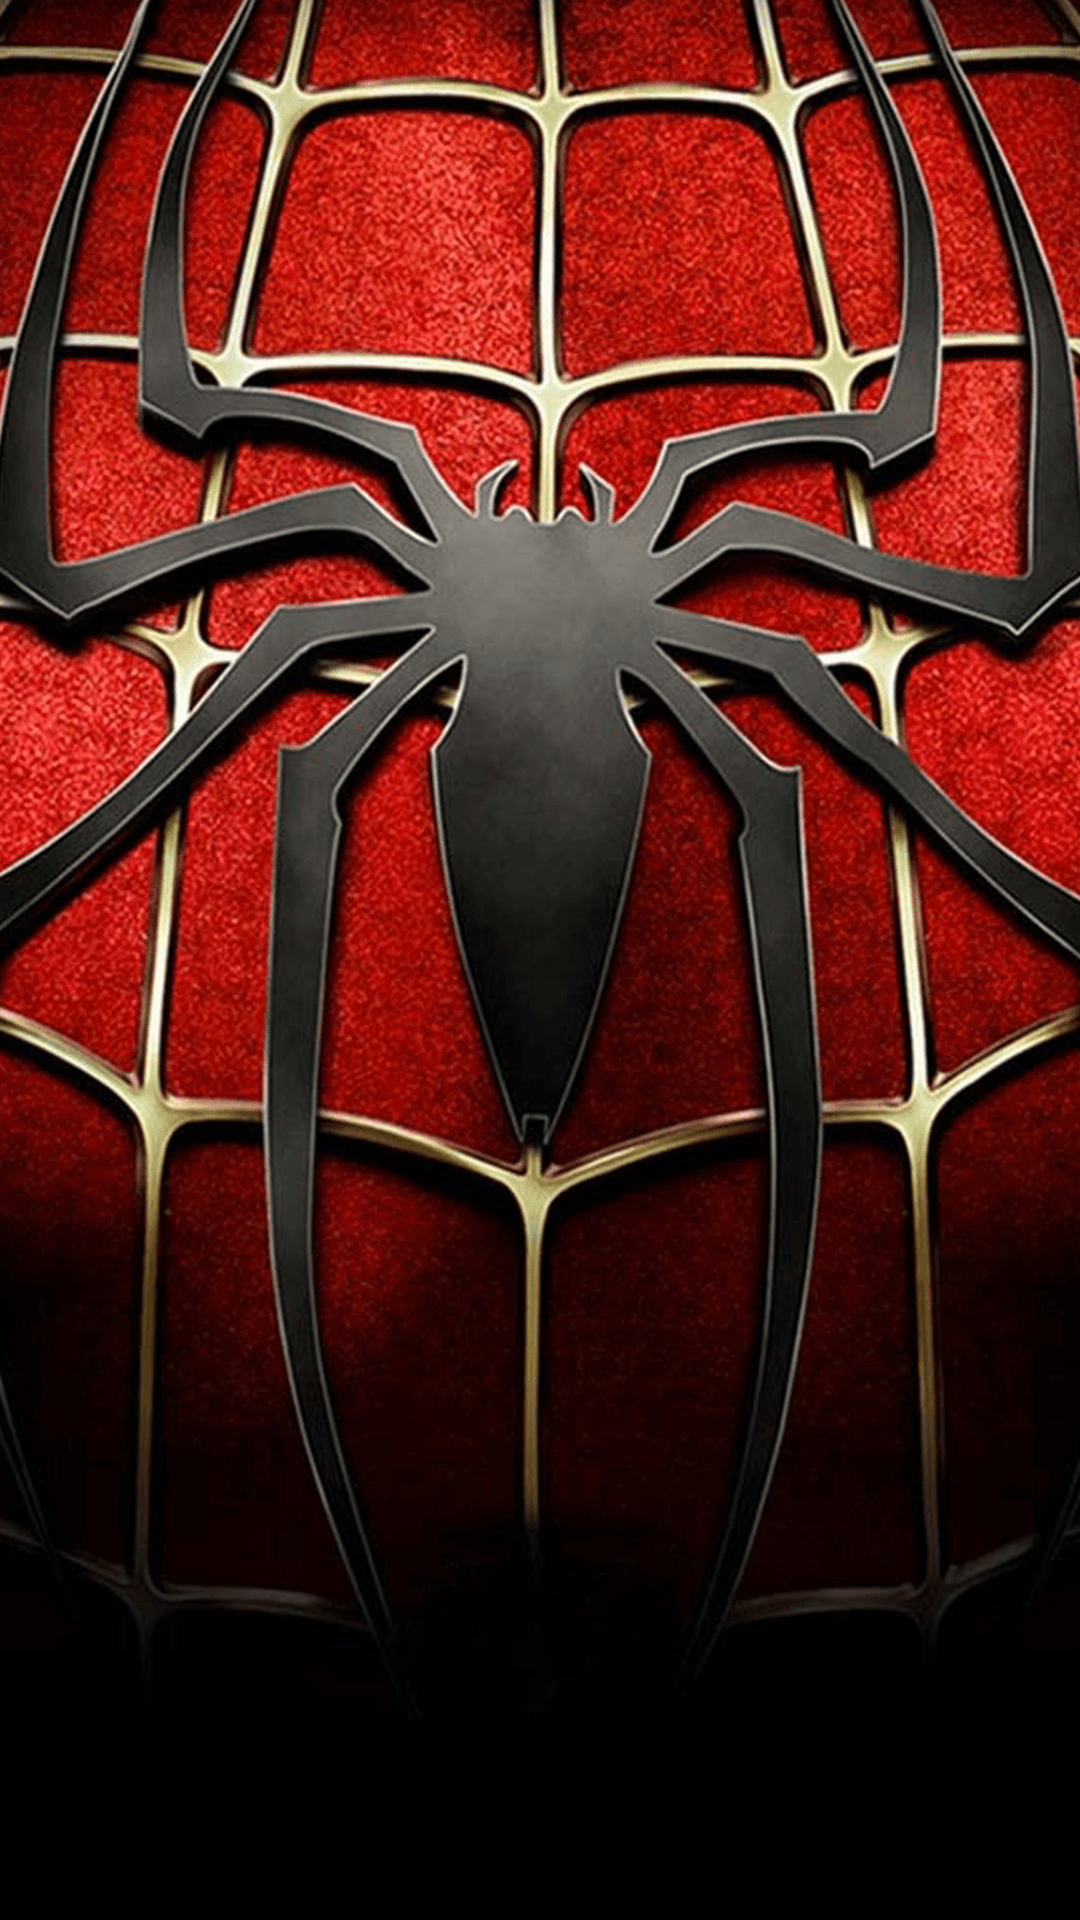 Download Our HD Spiderman Suit Wallpaper For Android Phones